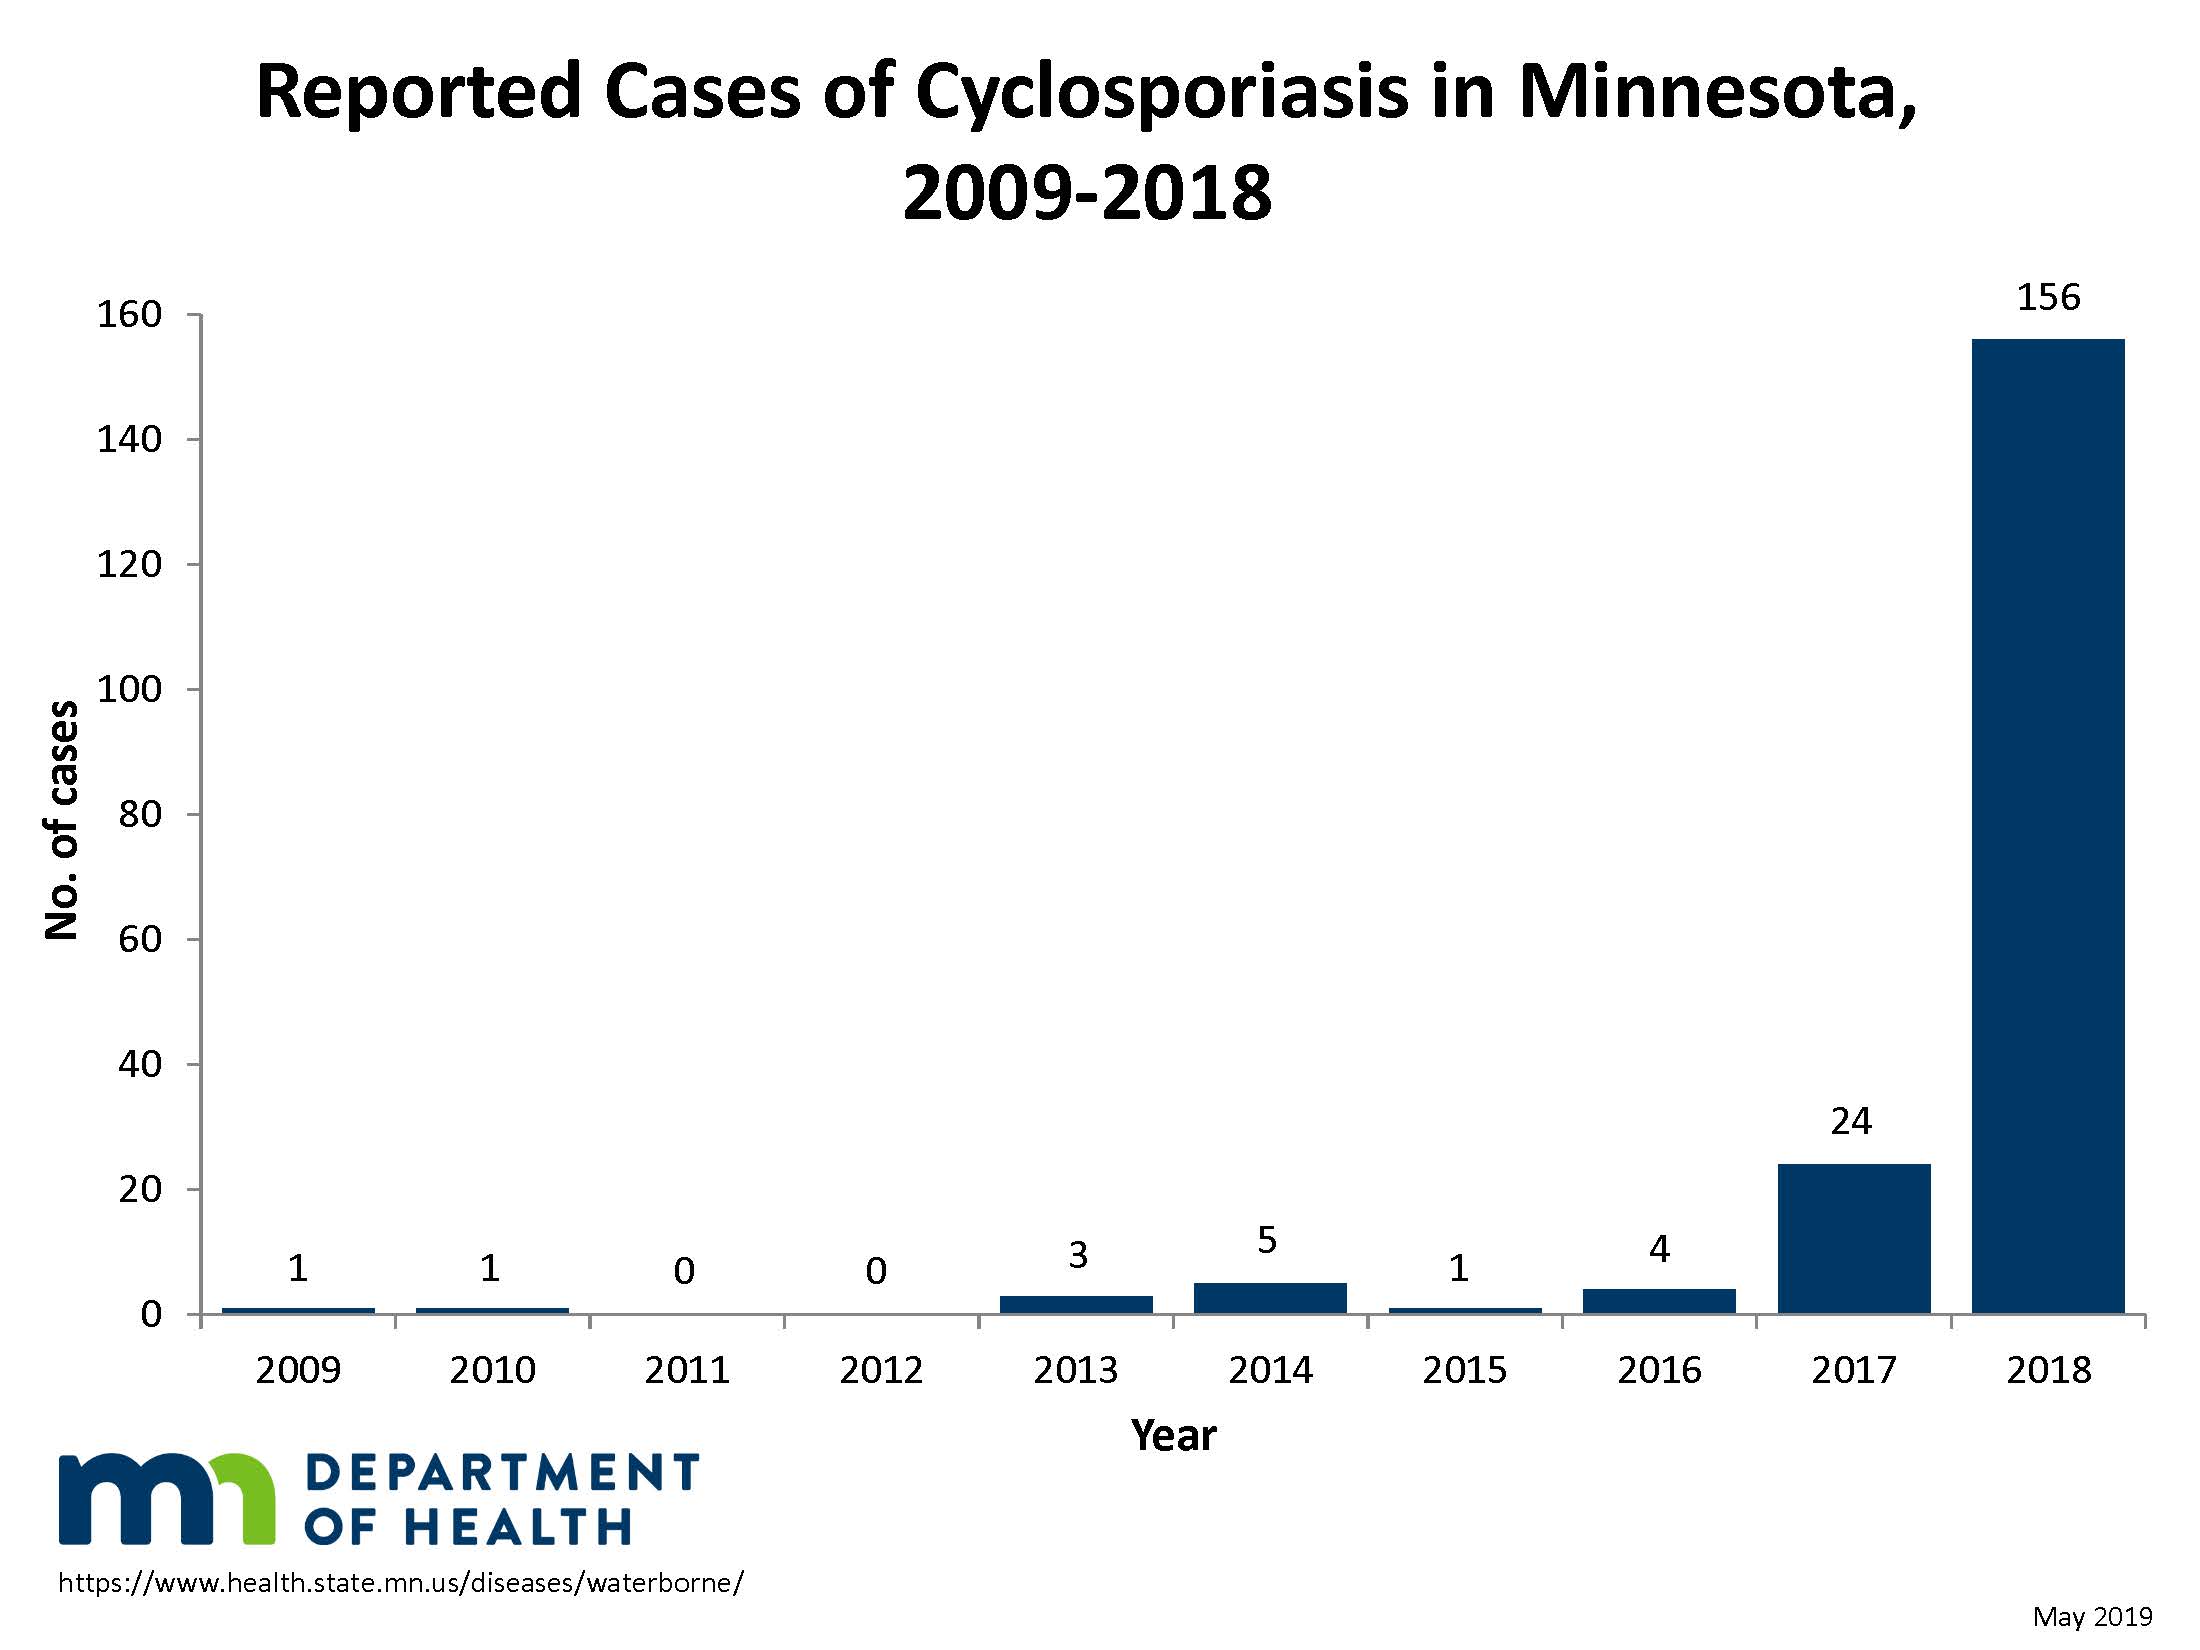 Reported cases of Cyclosporiaosis in Minnesota, 2009-2018